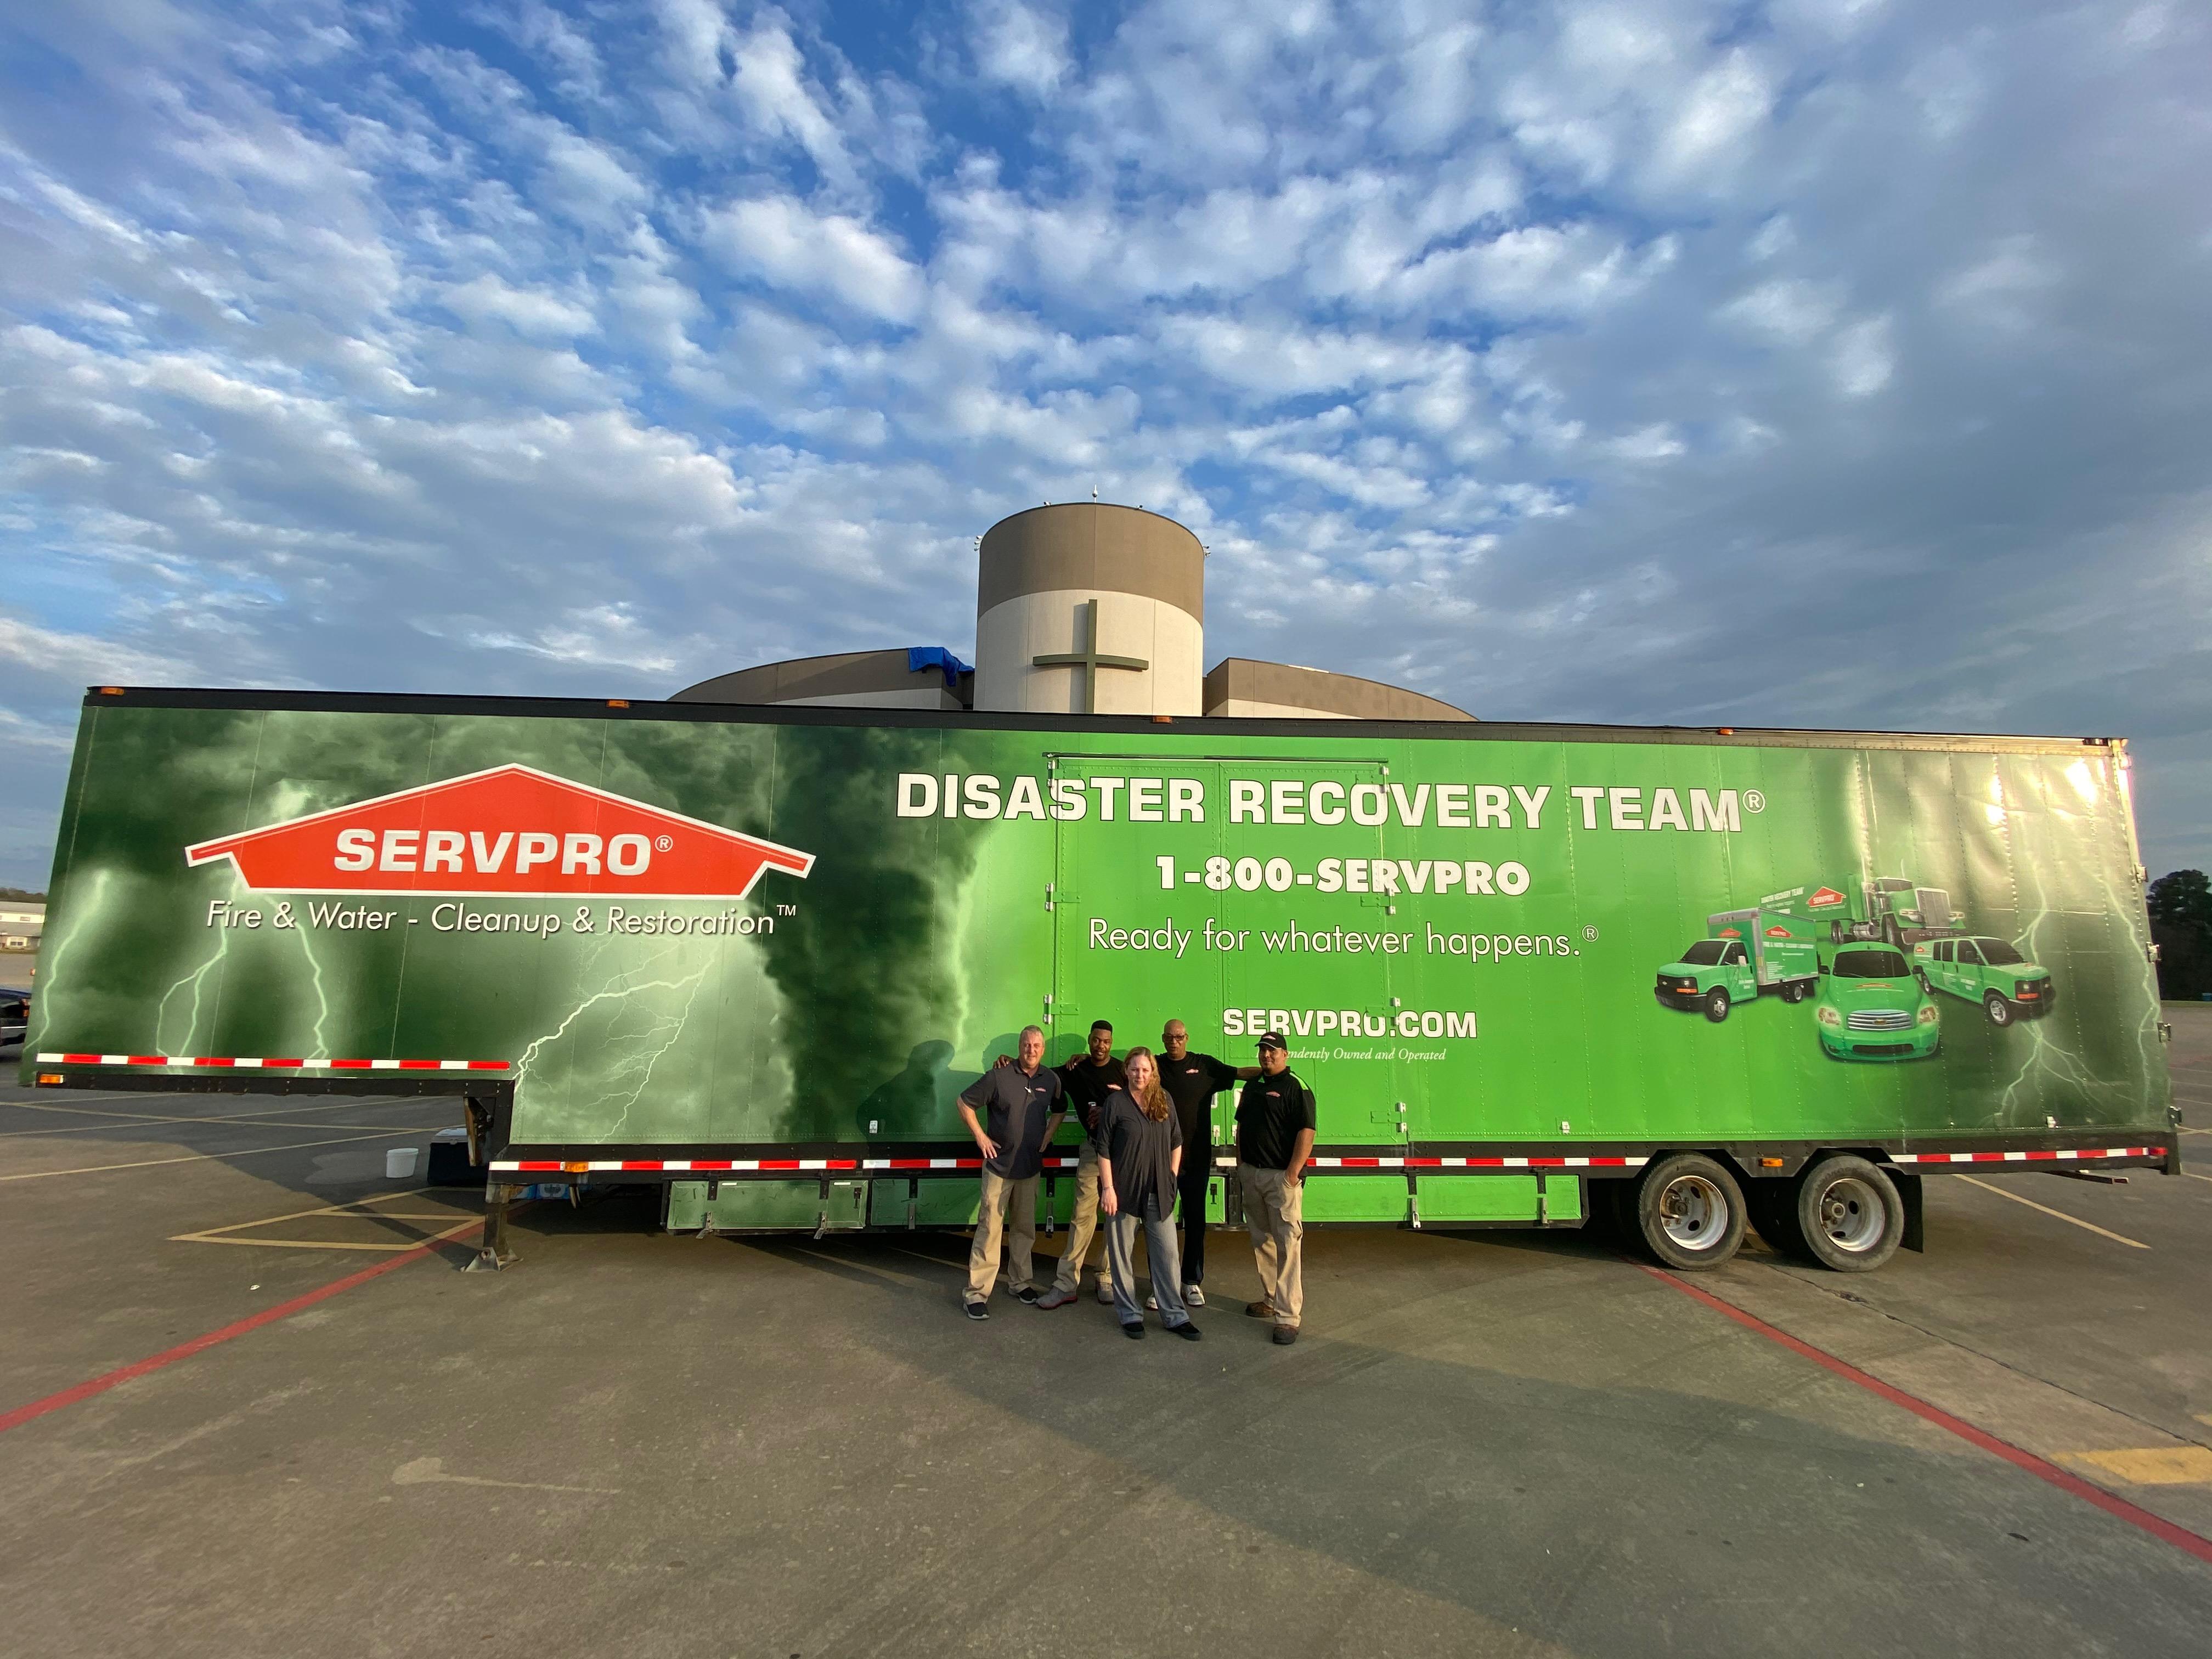 SERVPRO of Texarkana during a large commercial fire loss